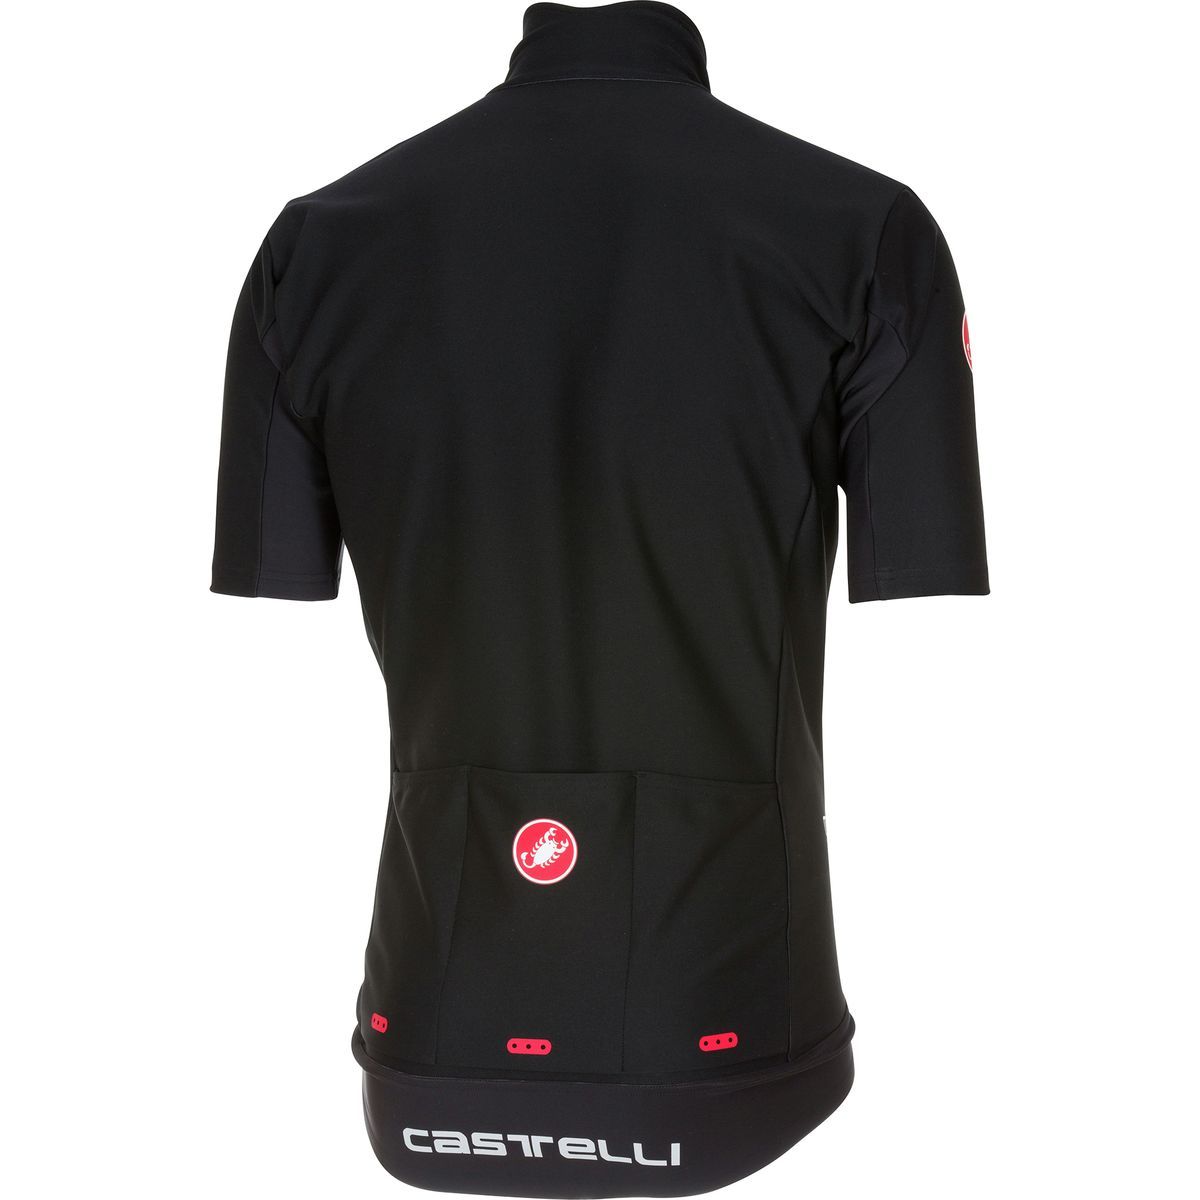 The Best Cycling Shorts and Jerseys for Warmer Rides